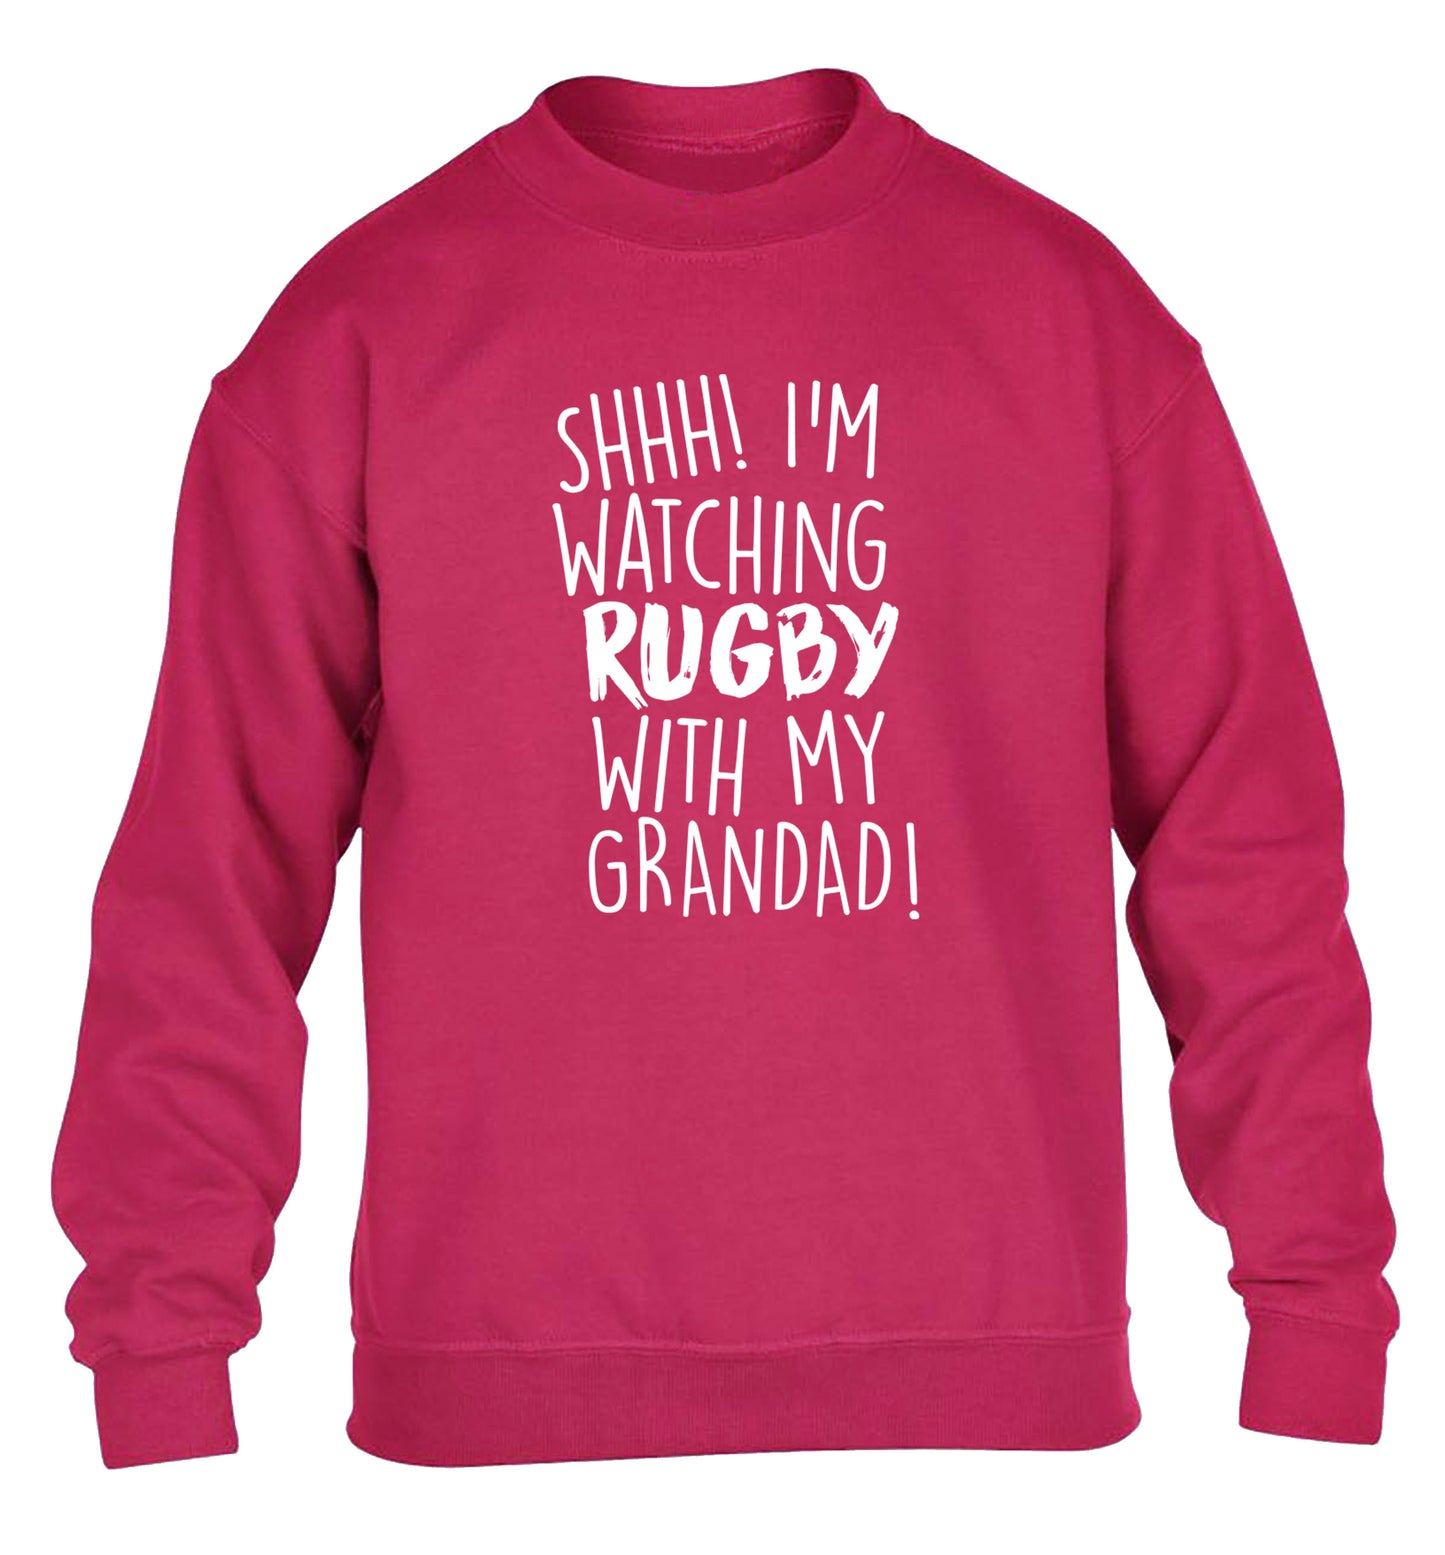 Shh I'm watching rugby with my grandaughter children's pink sweater 12-13 Years